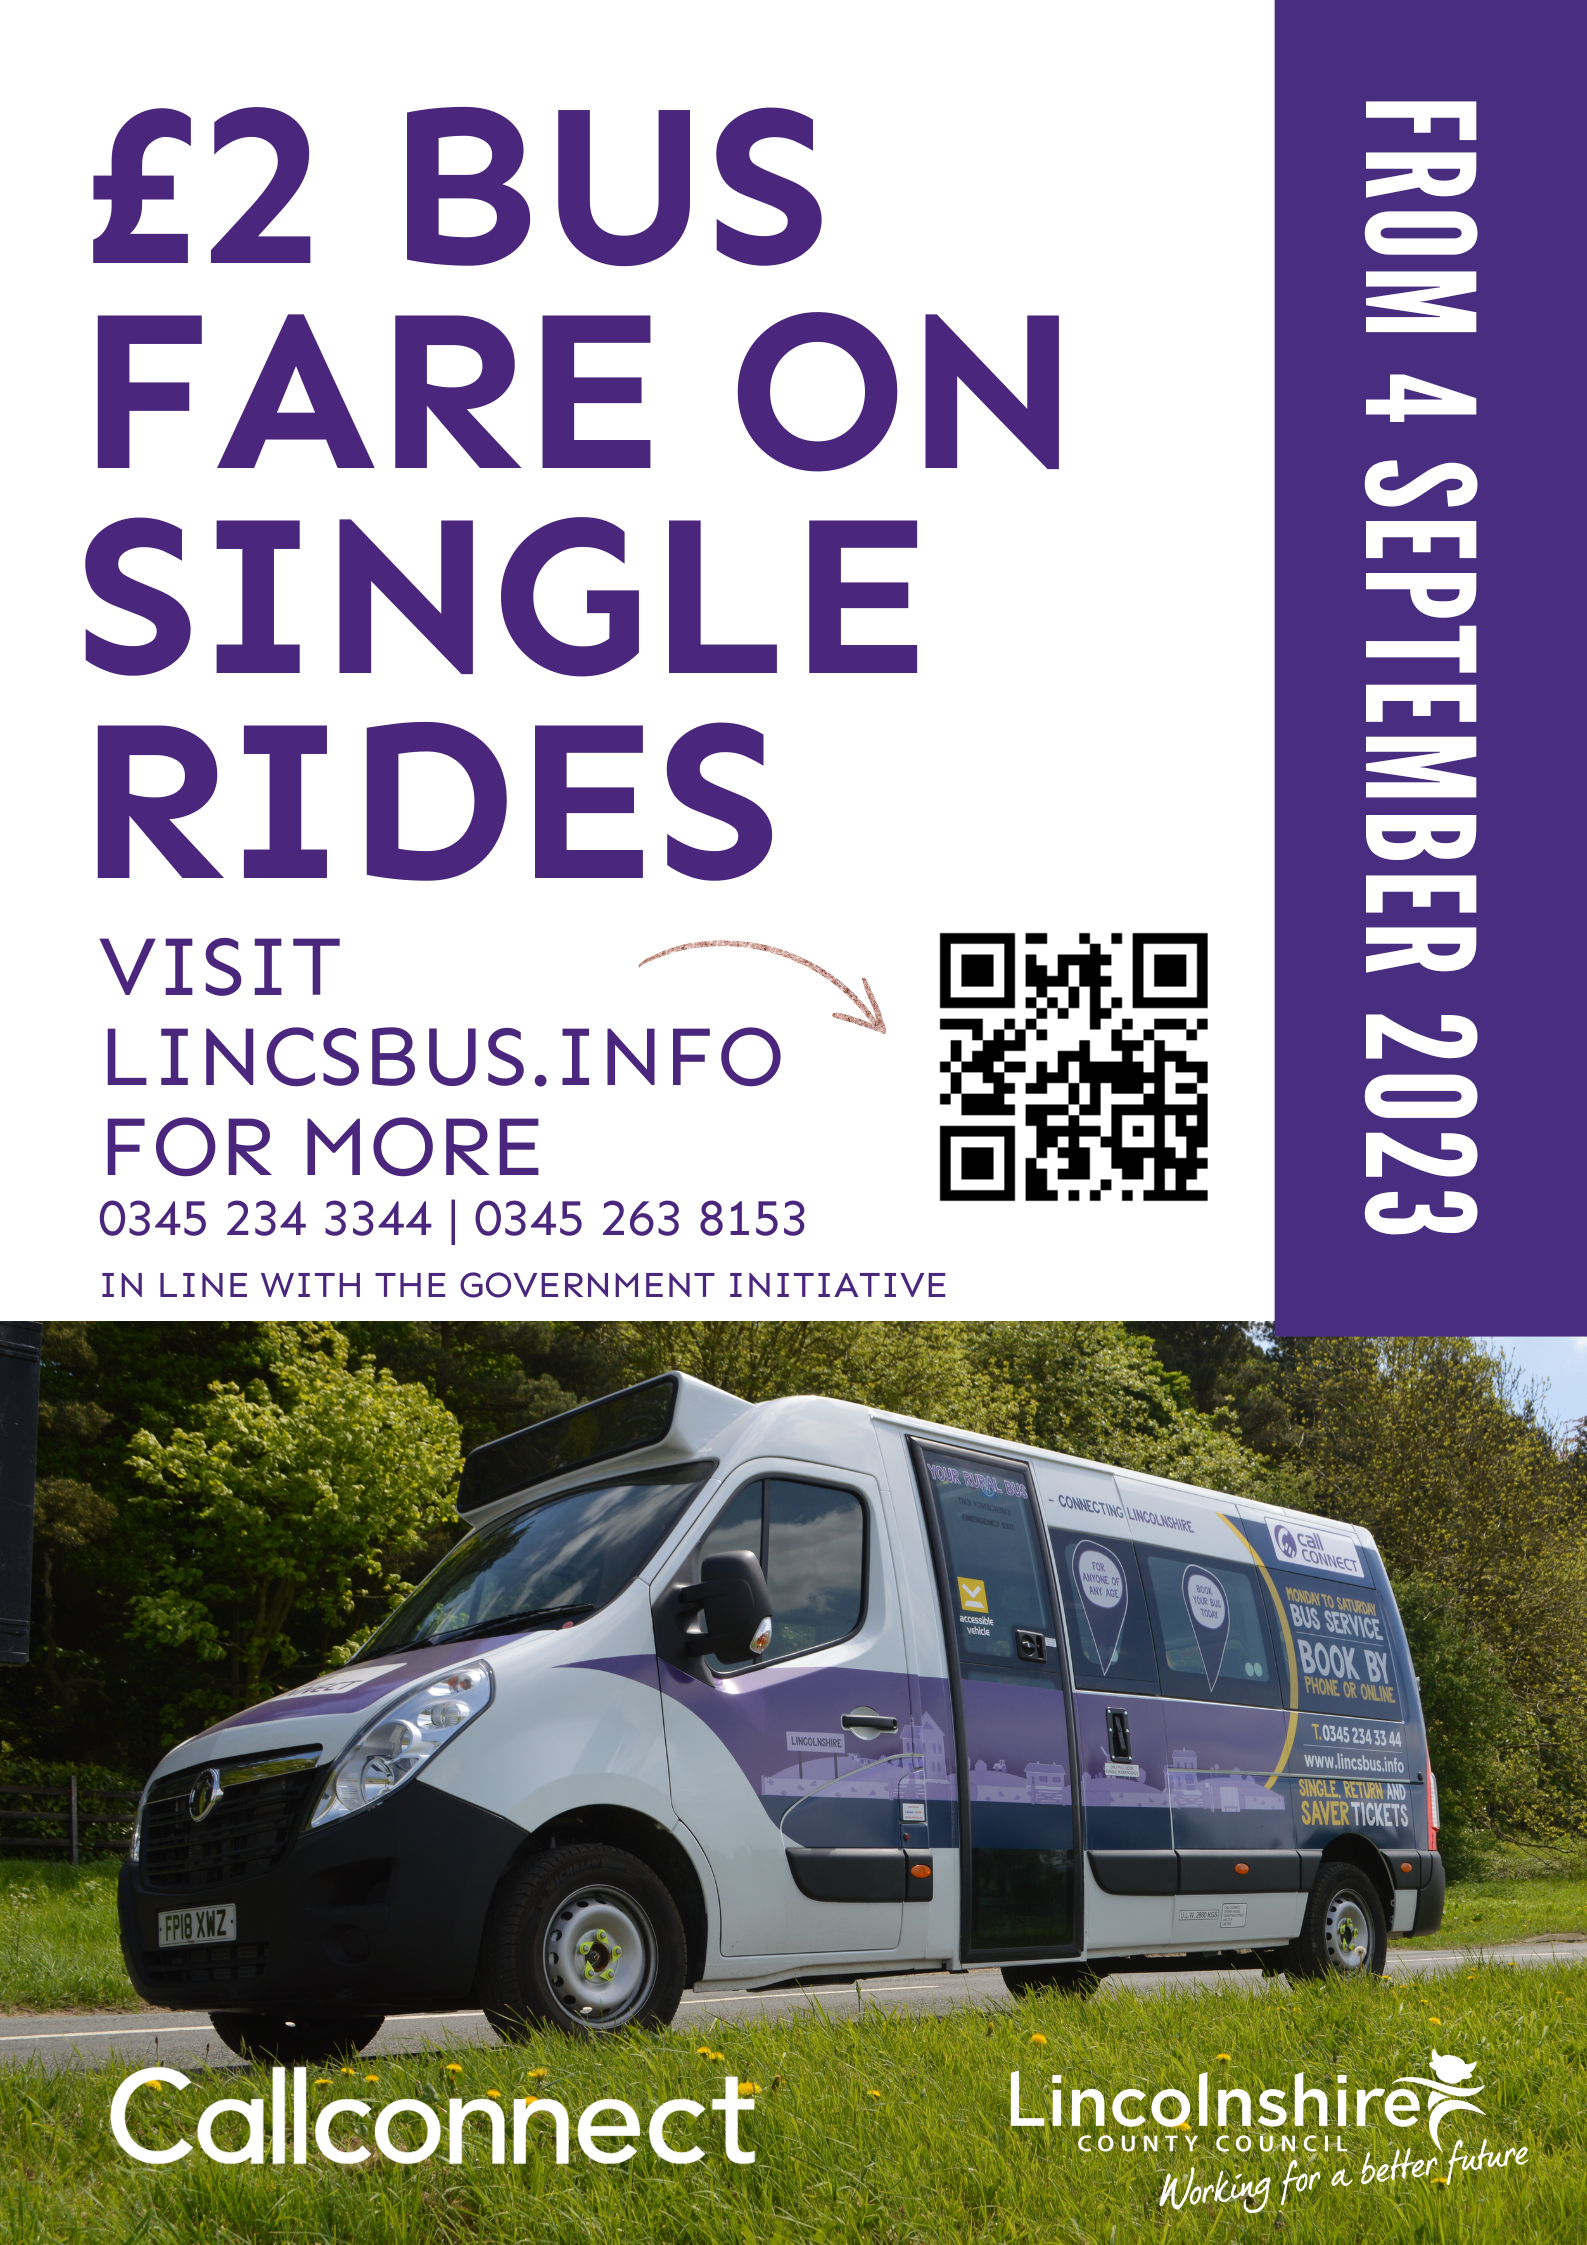 Call connect fares now only £2 maximum